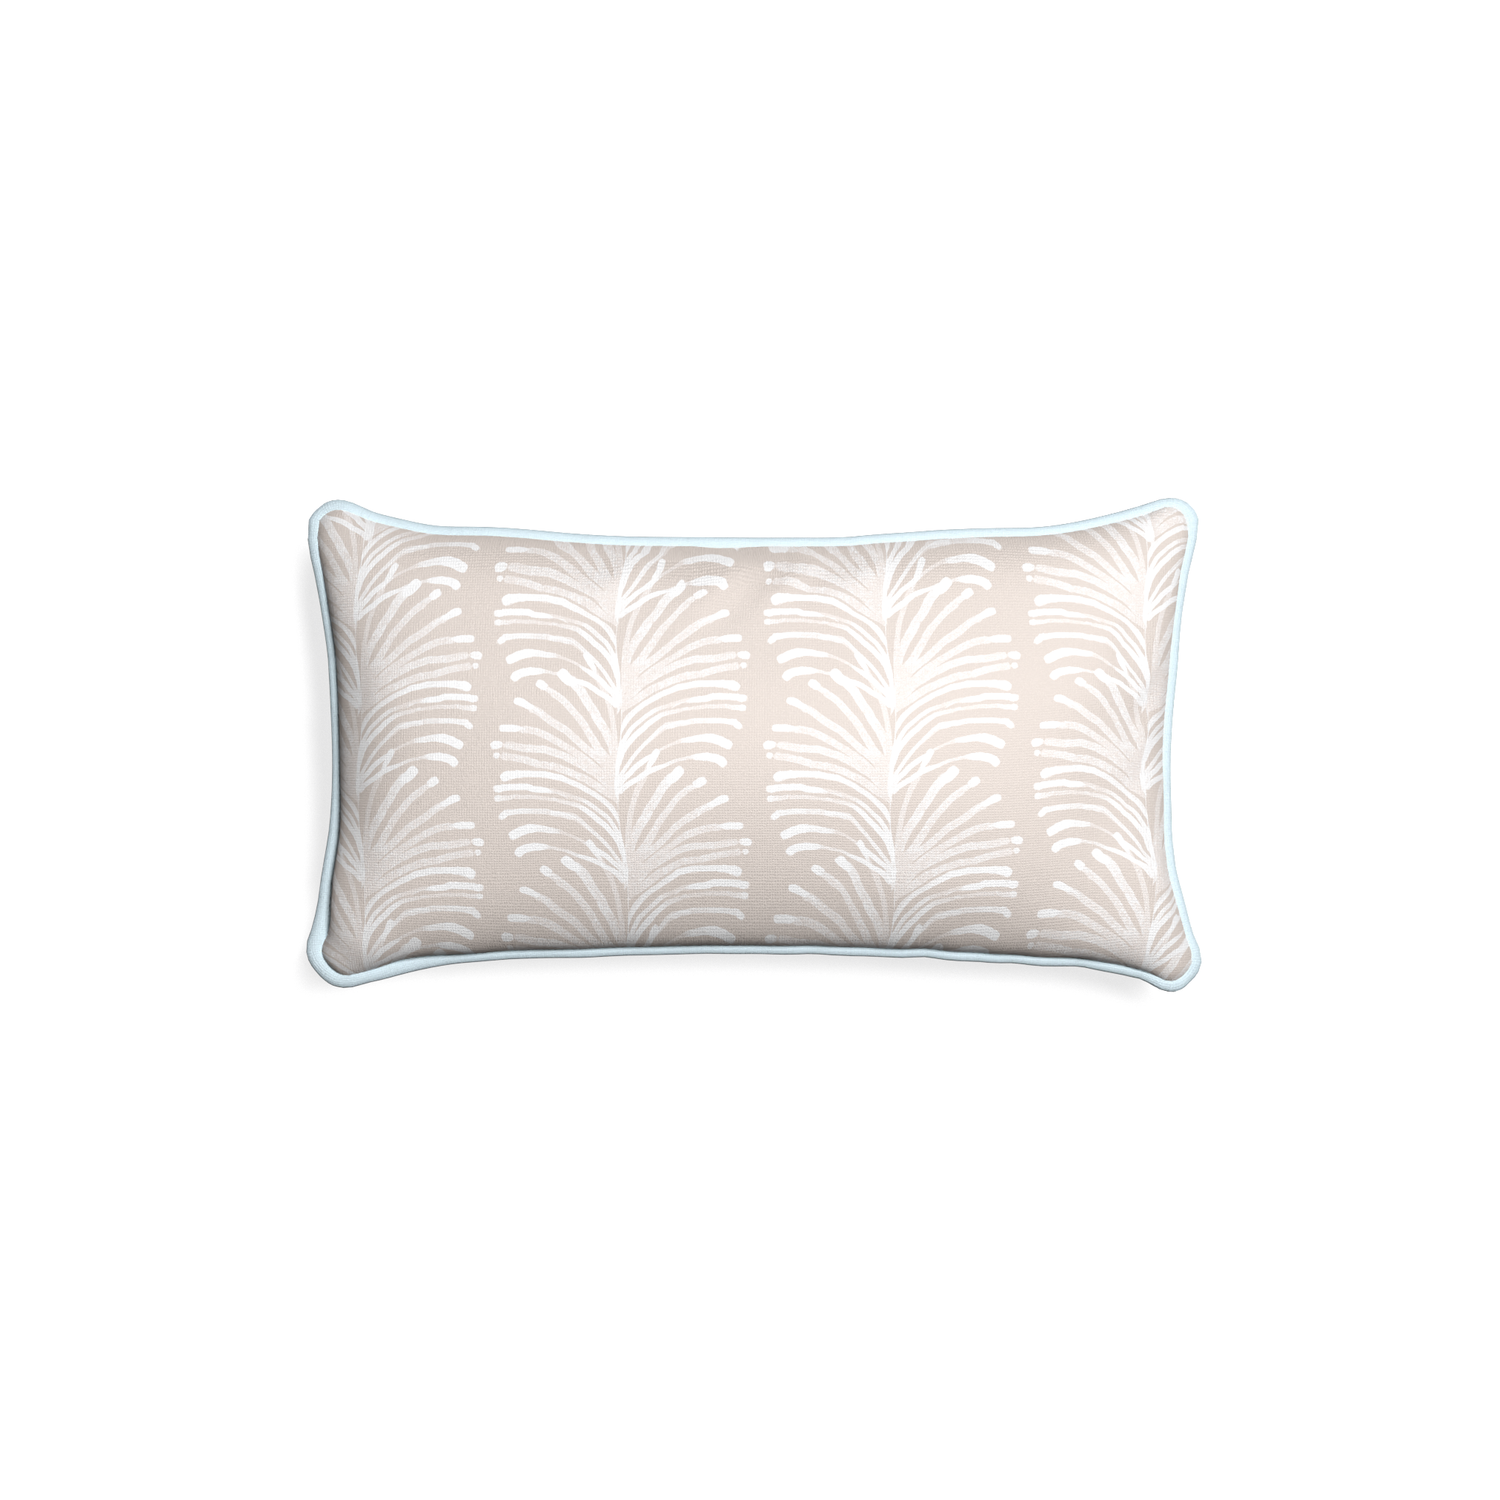 Petite-lumbar emma sand custom sand colored botanical stripepillow with powder piping on white background